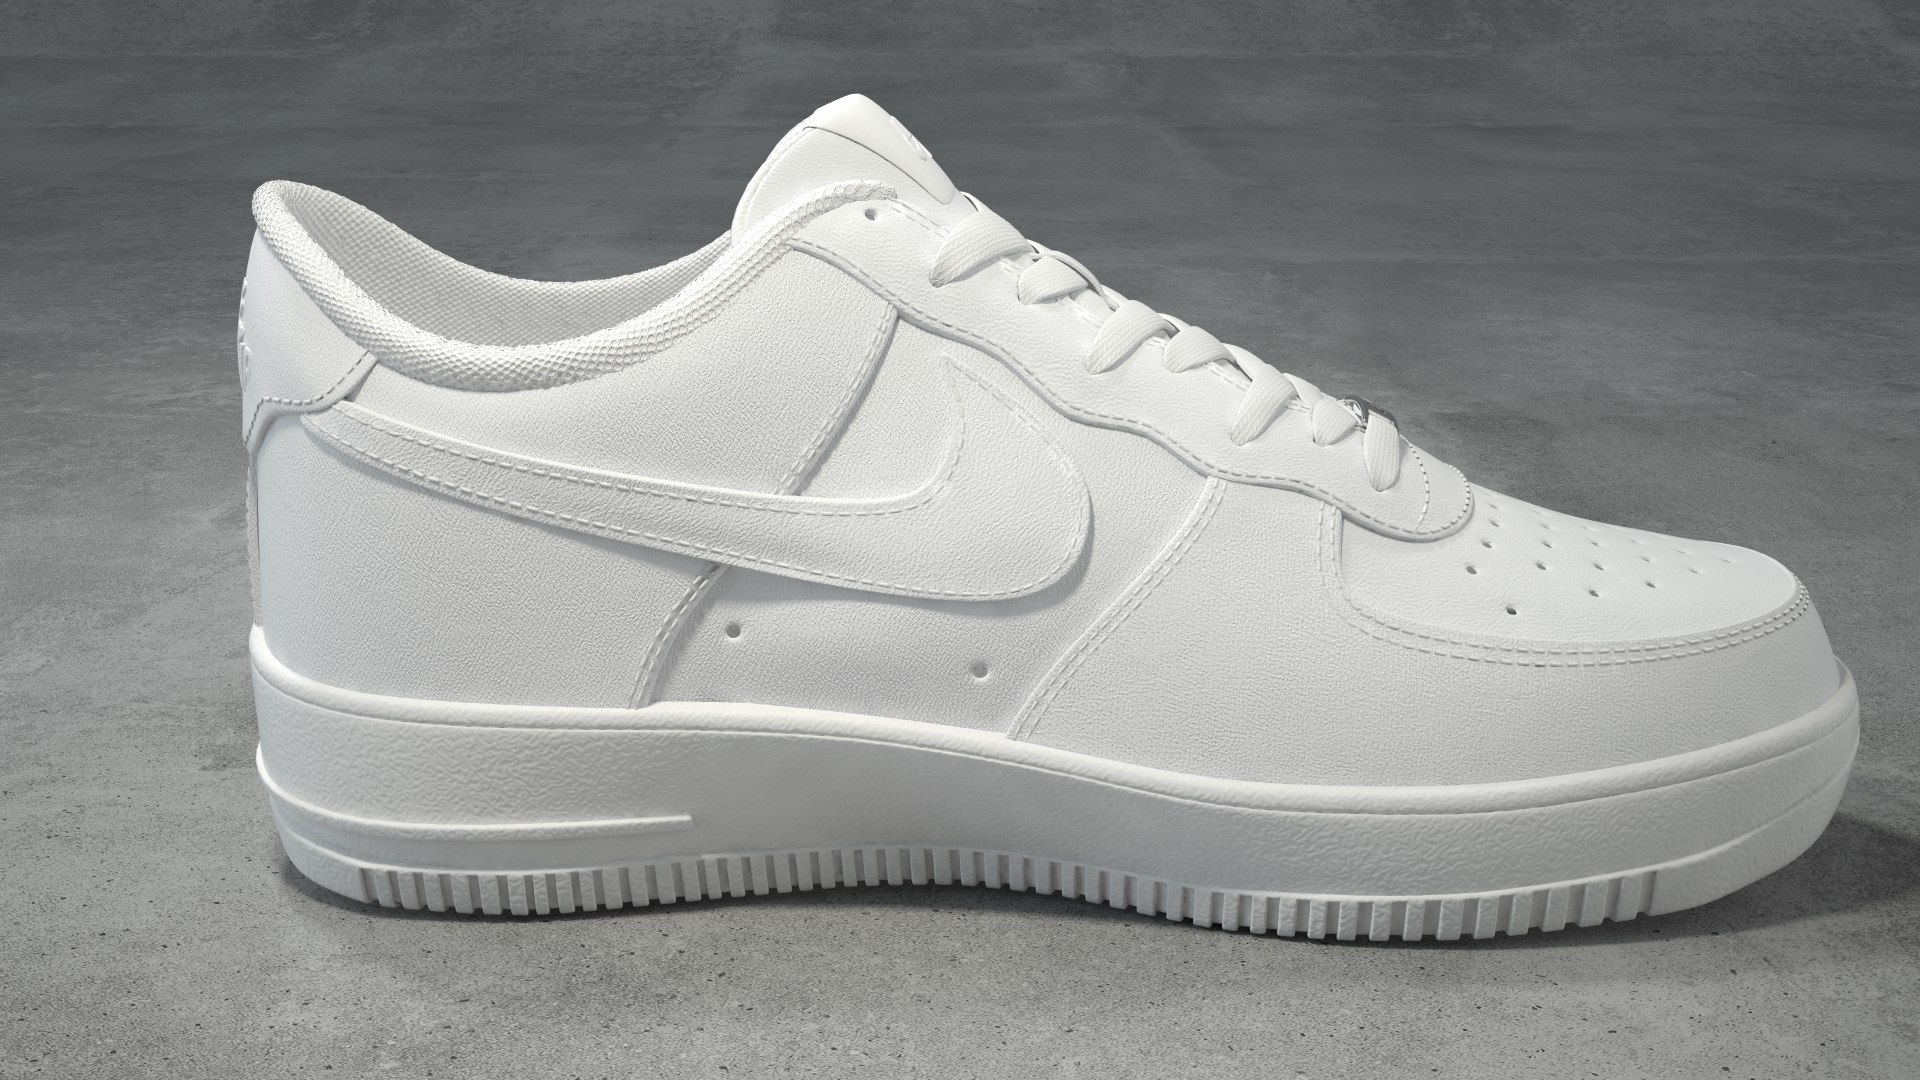 Nike Air Force 1 one x off-white fashion casual sneaker 3D model